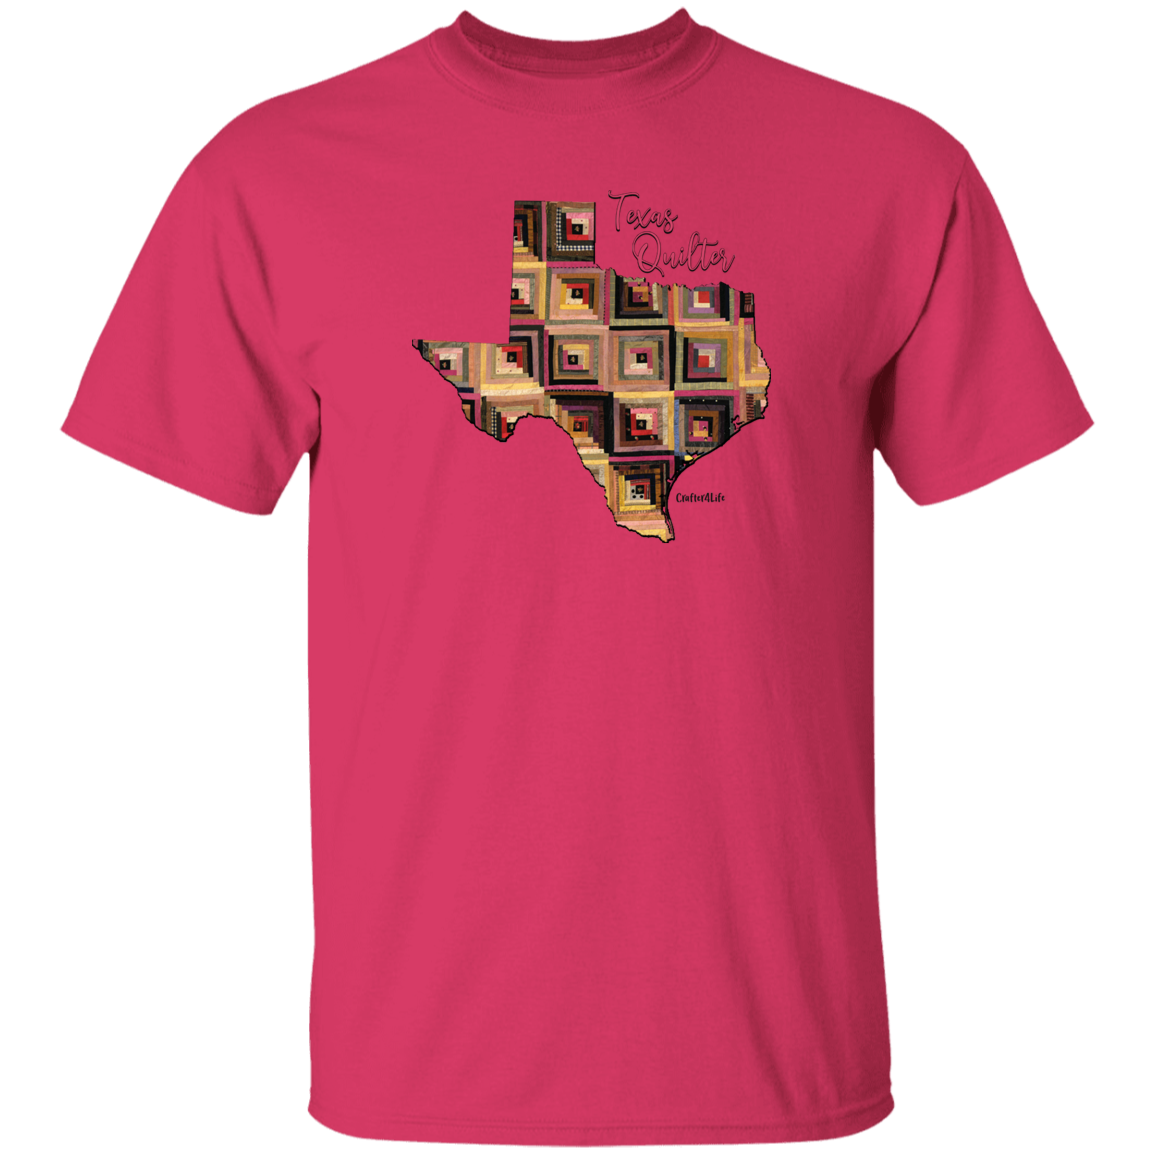 Texas Quilter T-Shirt, Gift for Quilting Friends and Family